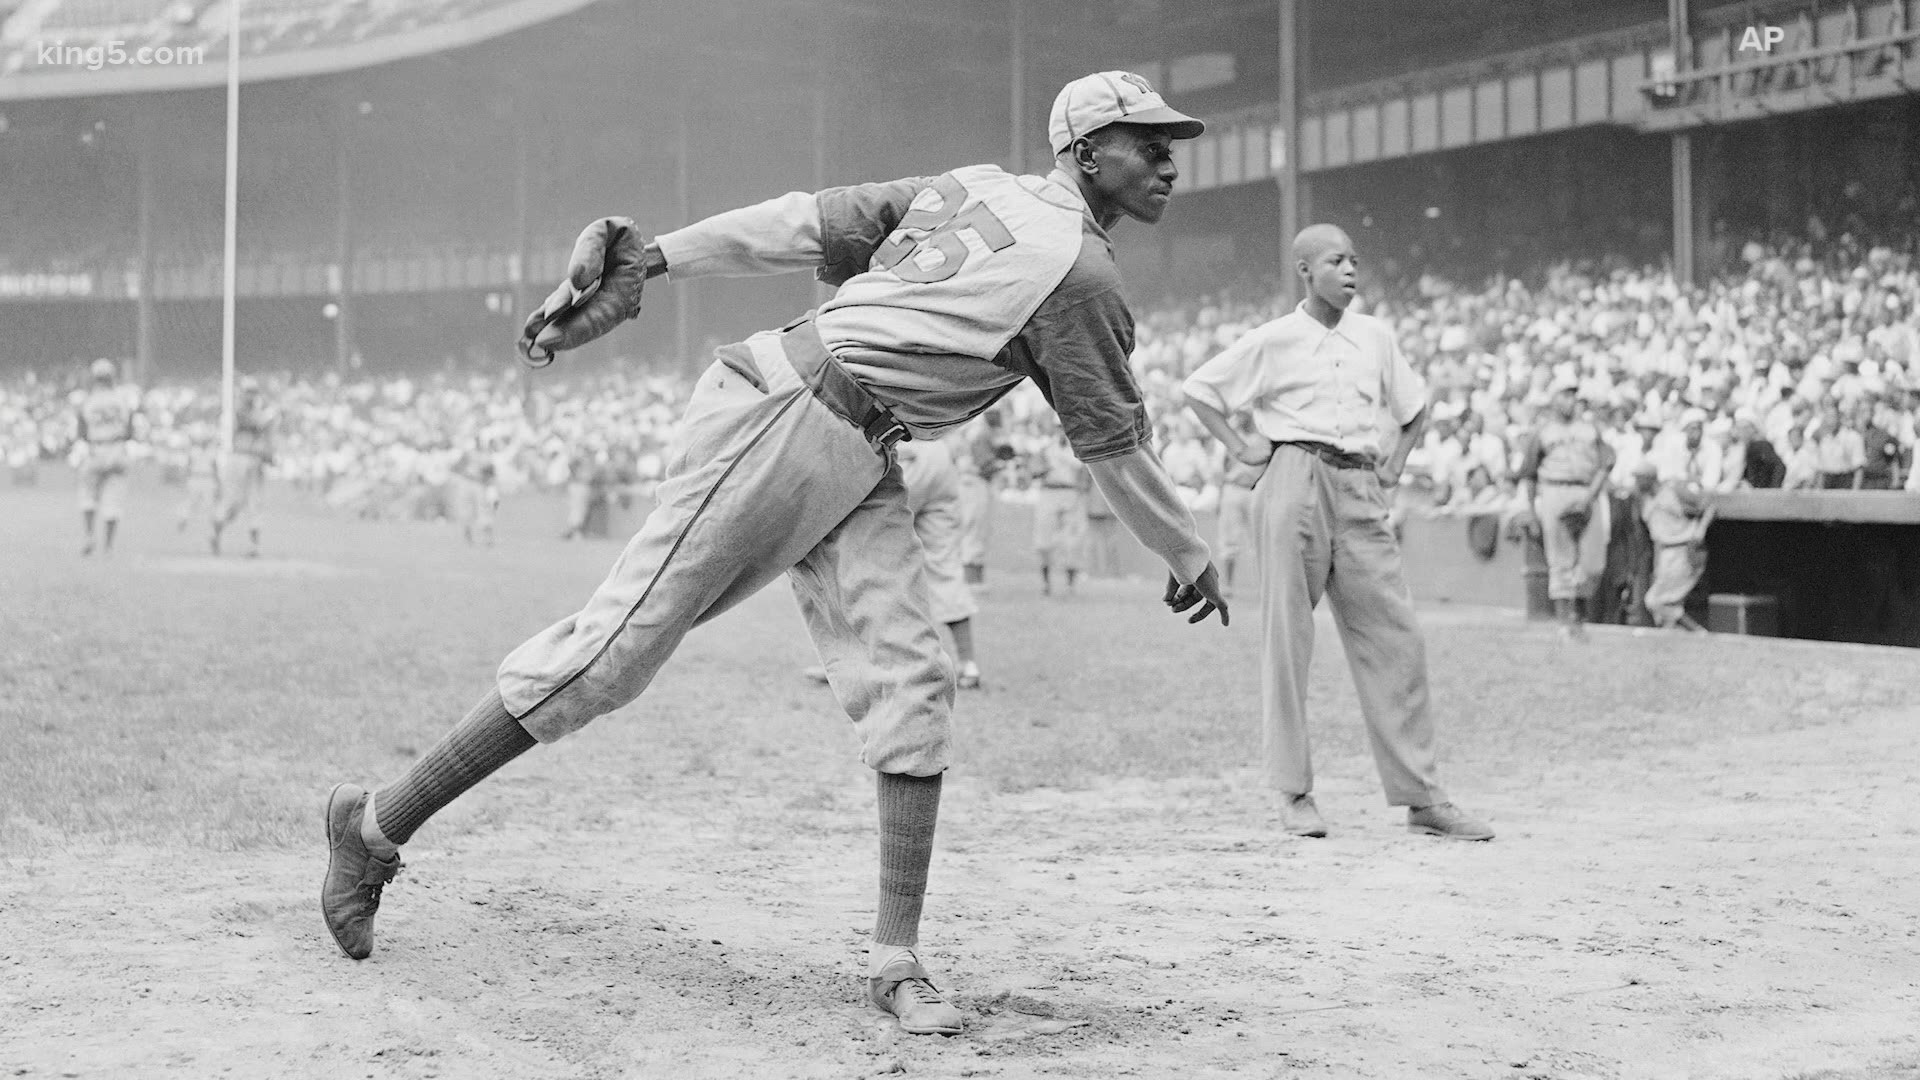 The change means 3,400 Black professional baseball players who played in the Negro Leagues are now considered major league status.